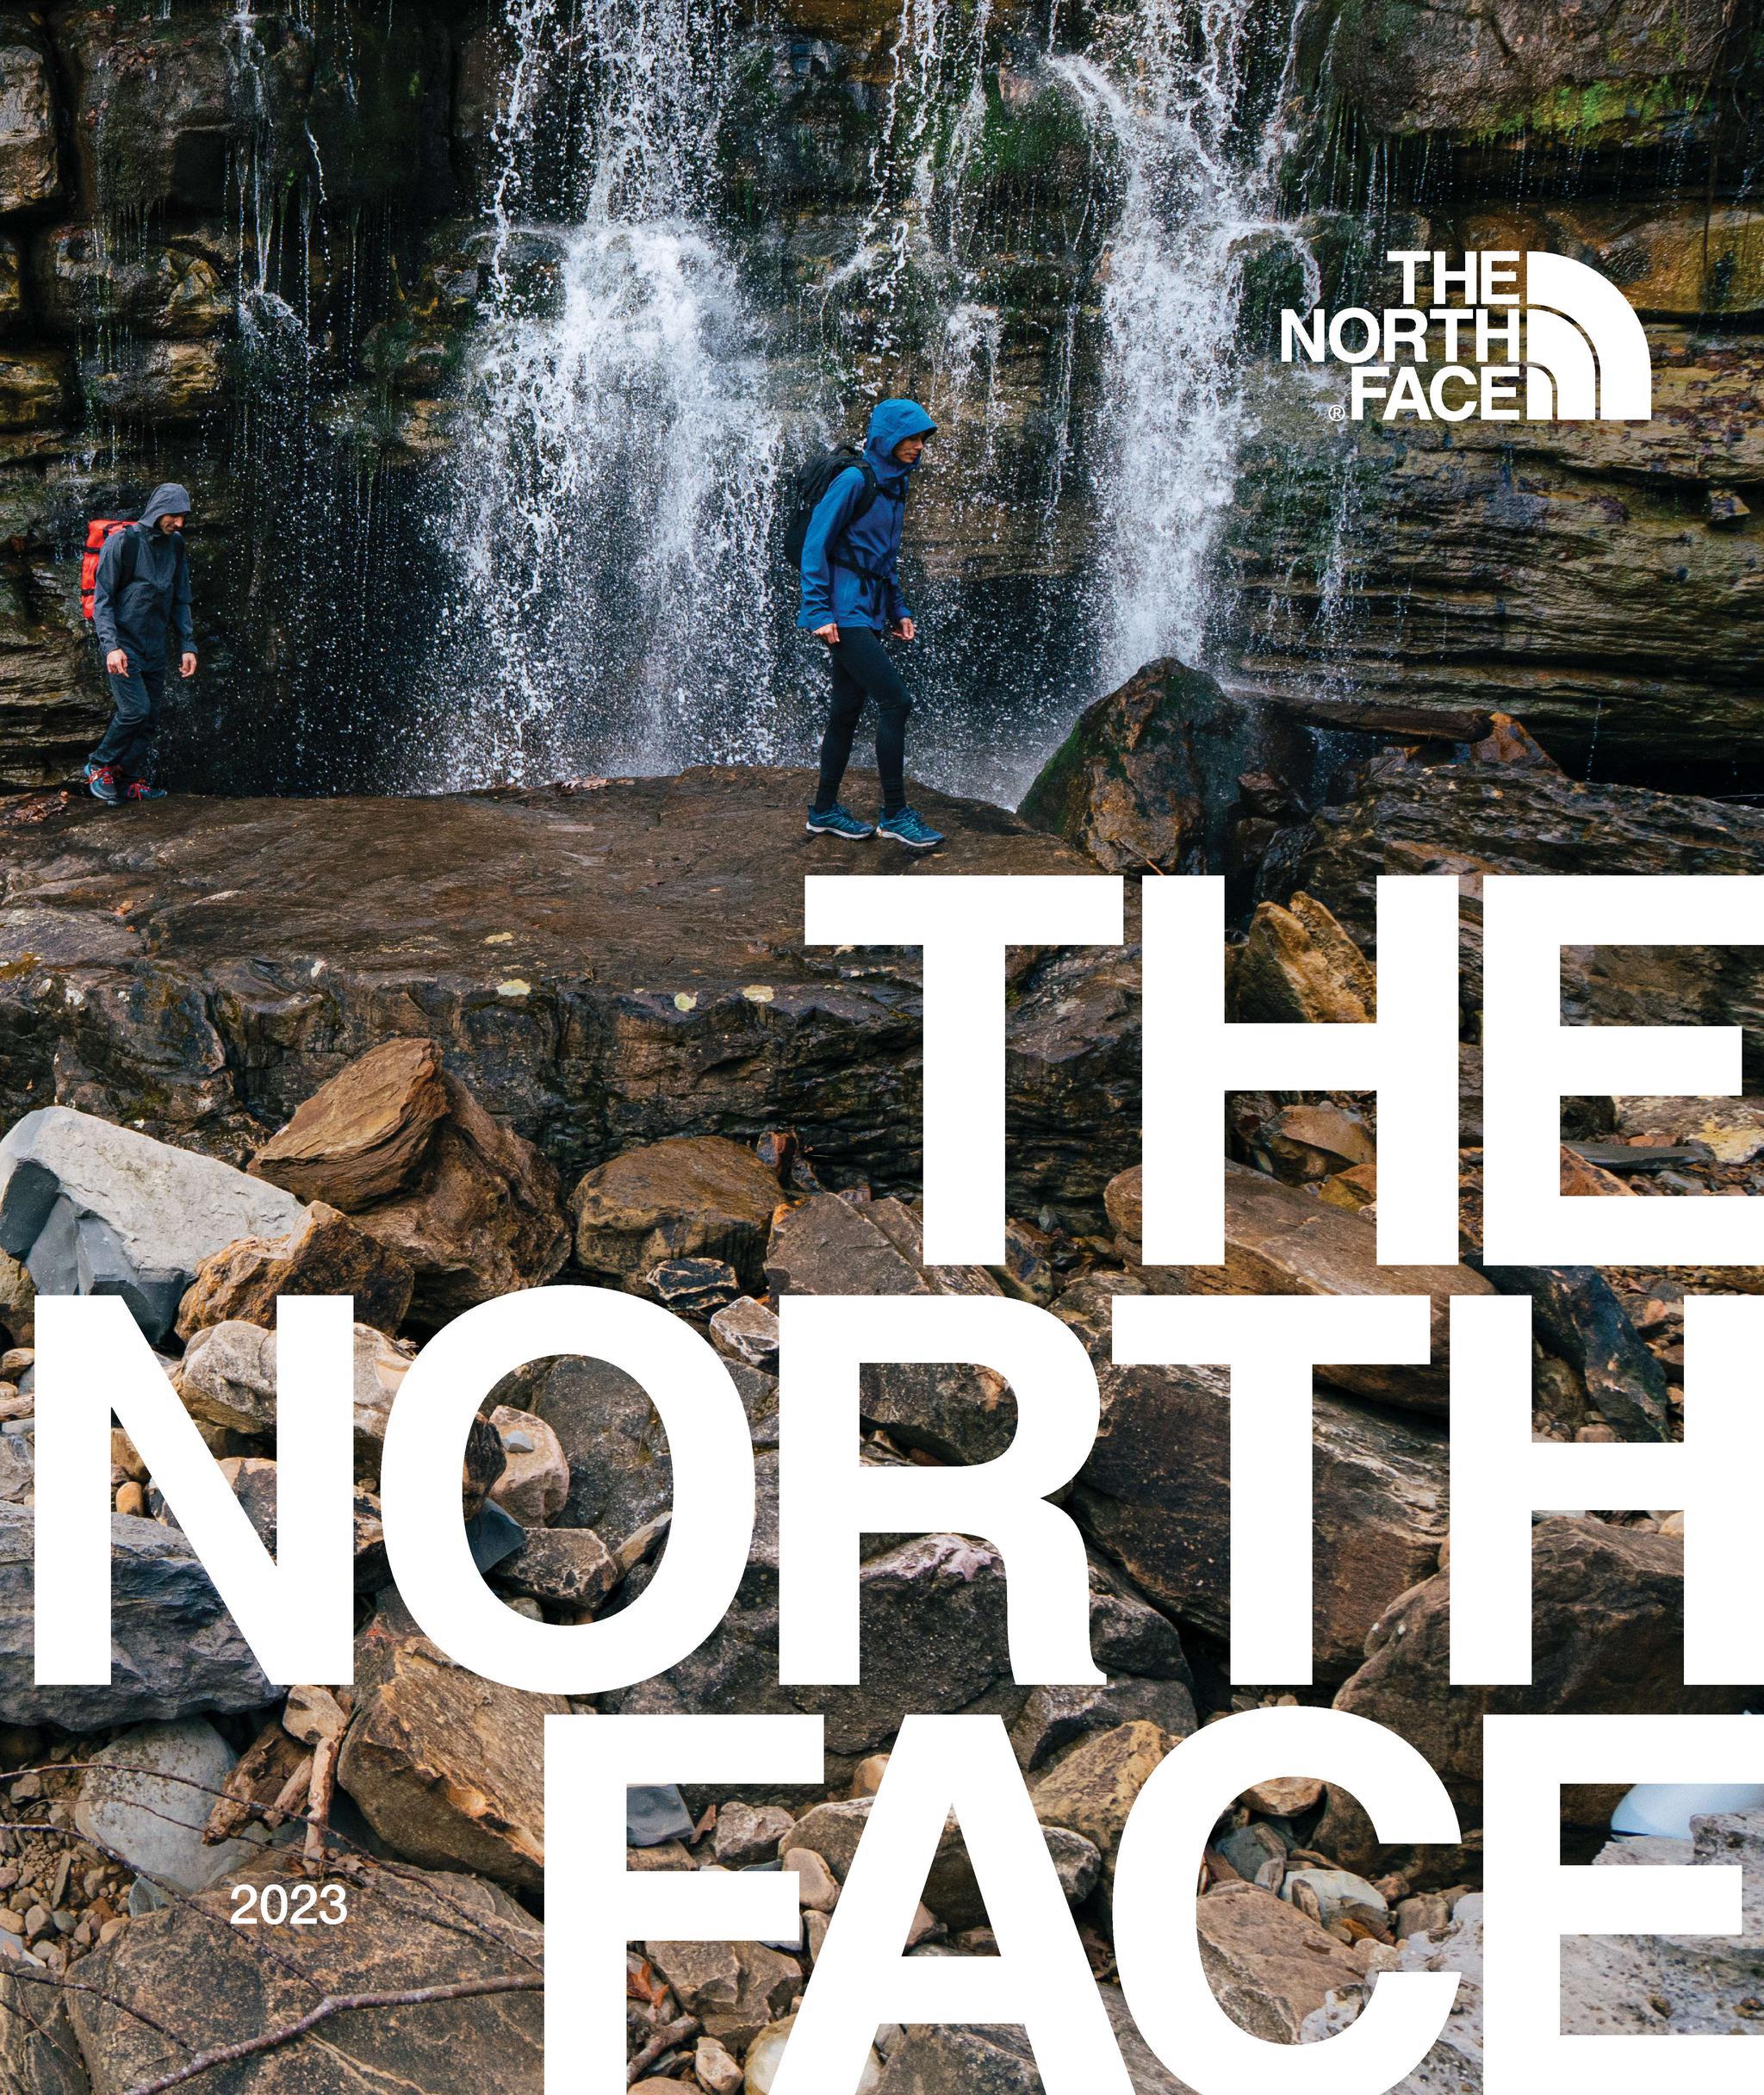 The North Face - Catalog - 2023